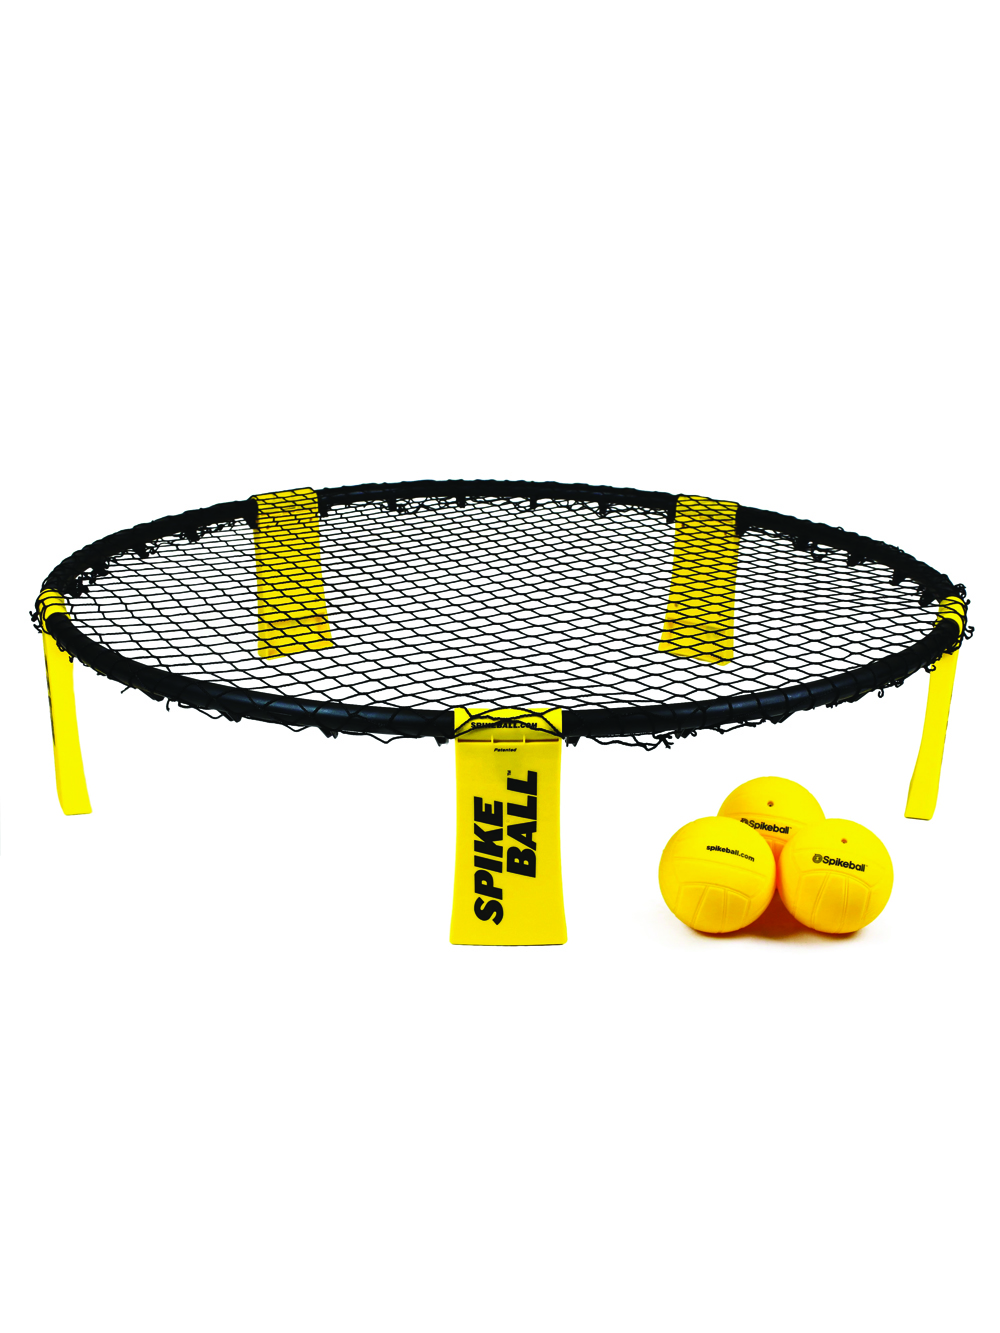 Spikeball Game Set Midwest Volleyball Warehouse.